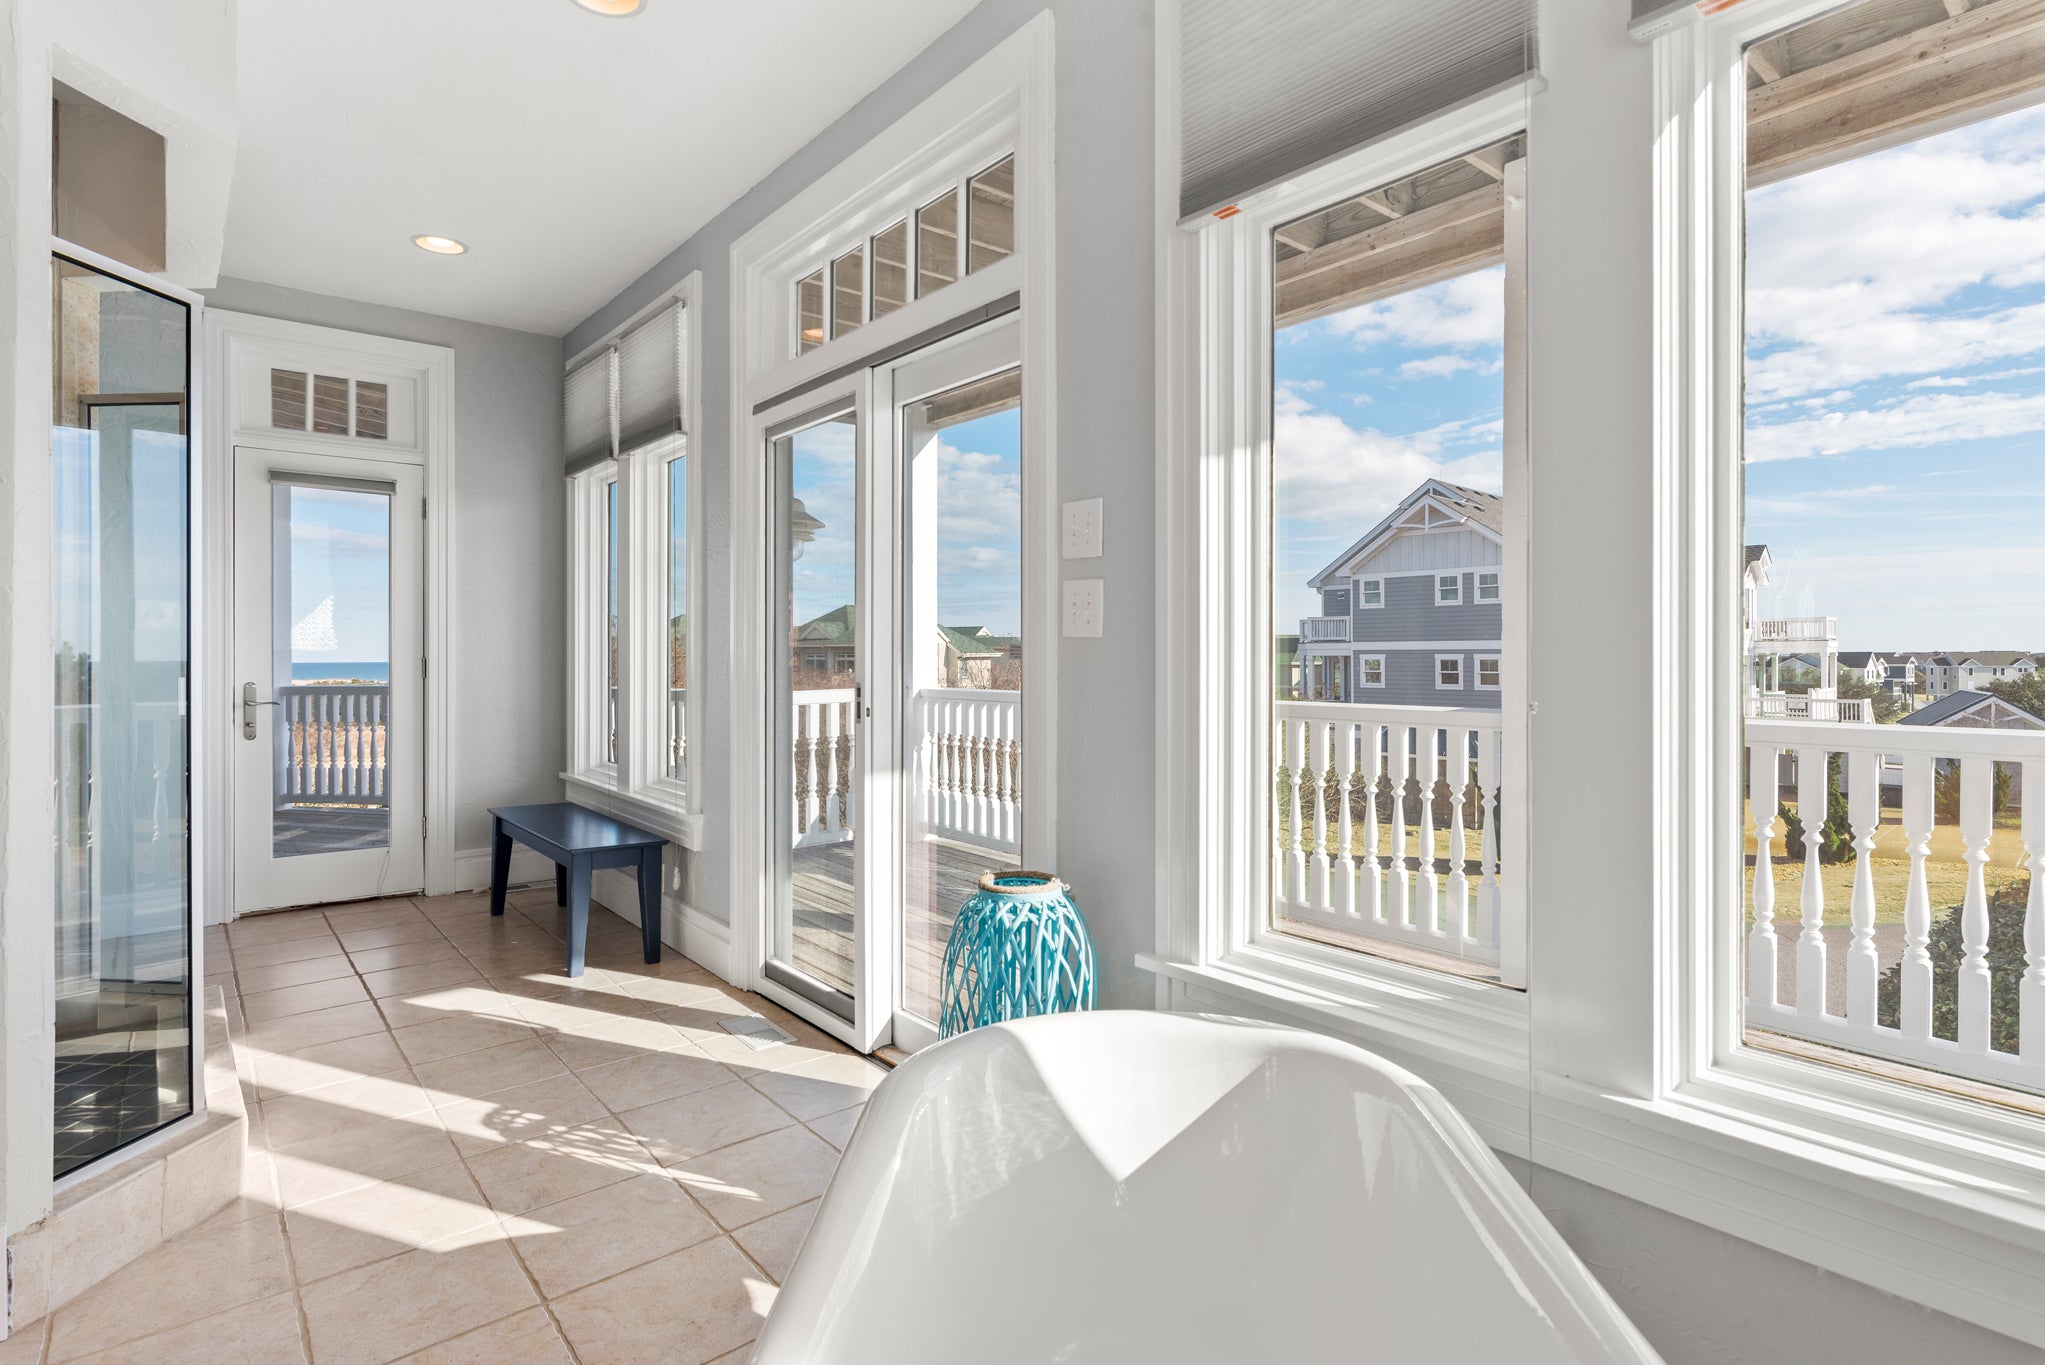 CC198: Sunshine & Water Views - Best in the Outer Banks! | Mid Level Bedroom 7 Private Bath